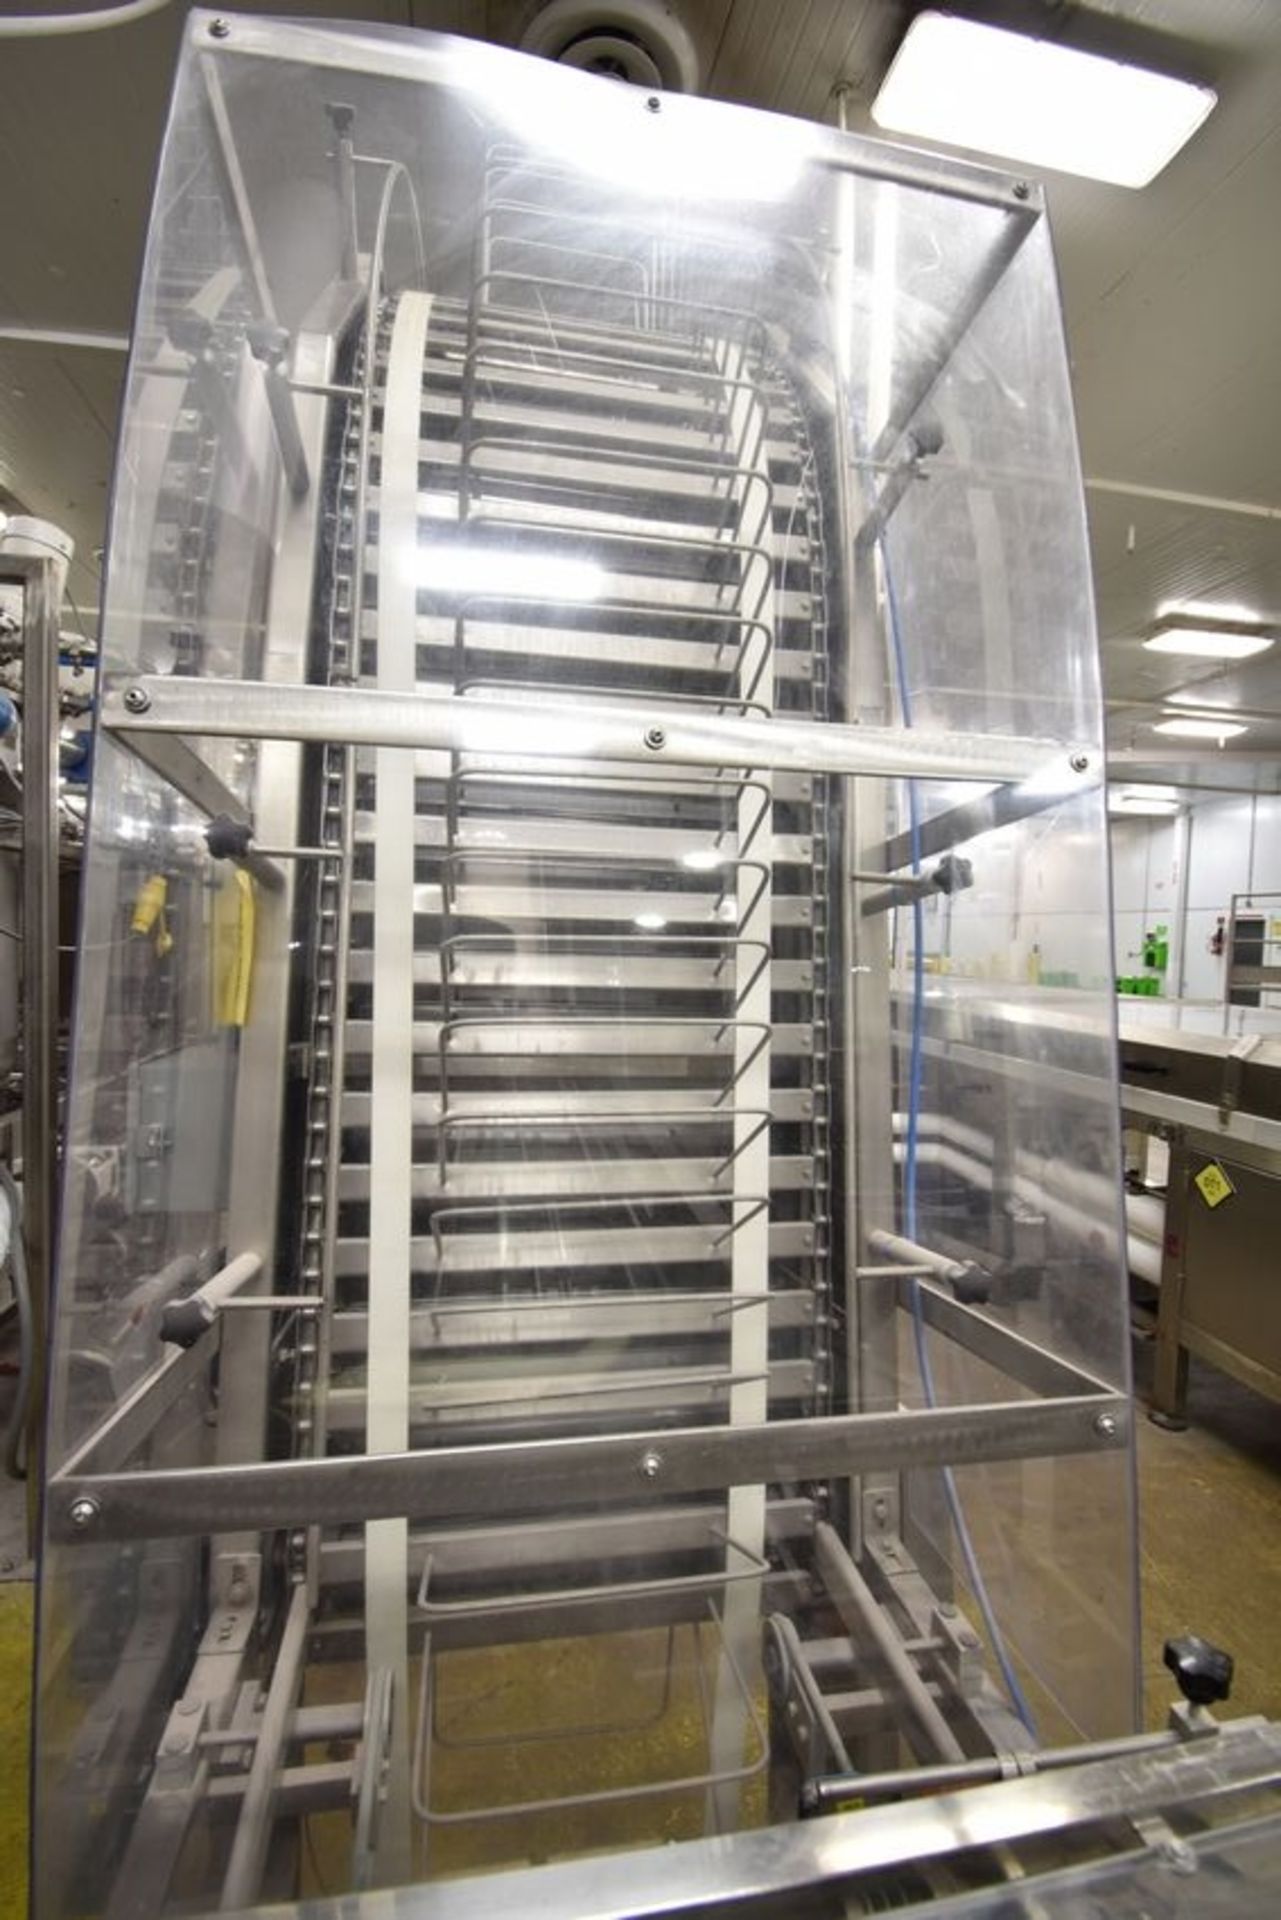 All food Arching cooling conveyor | All food Arching cooling conveyor. Part of bulk bid lot 255A. - Image 9 of 11